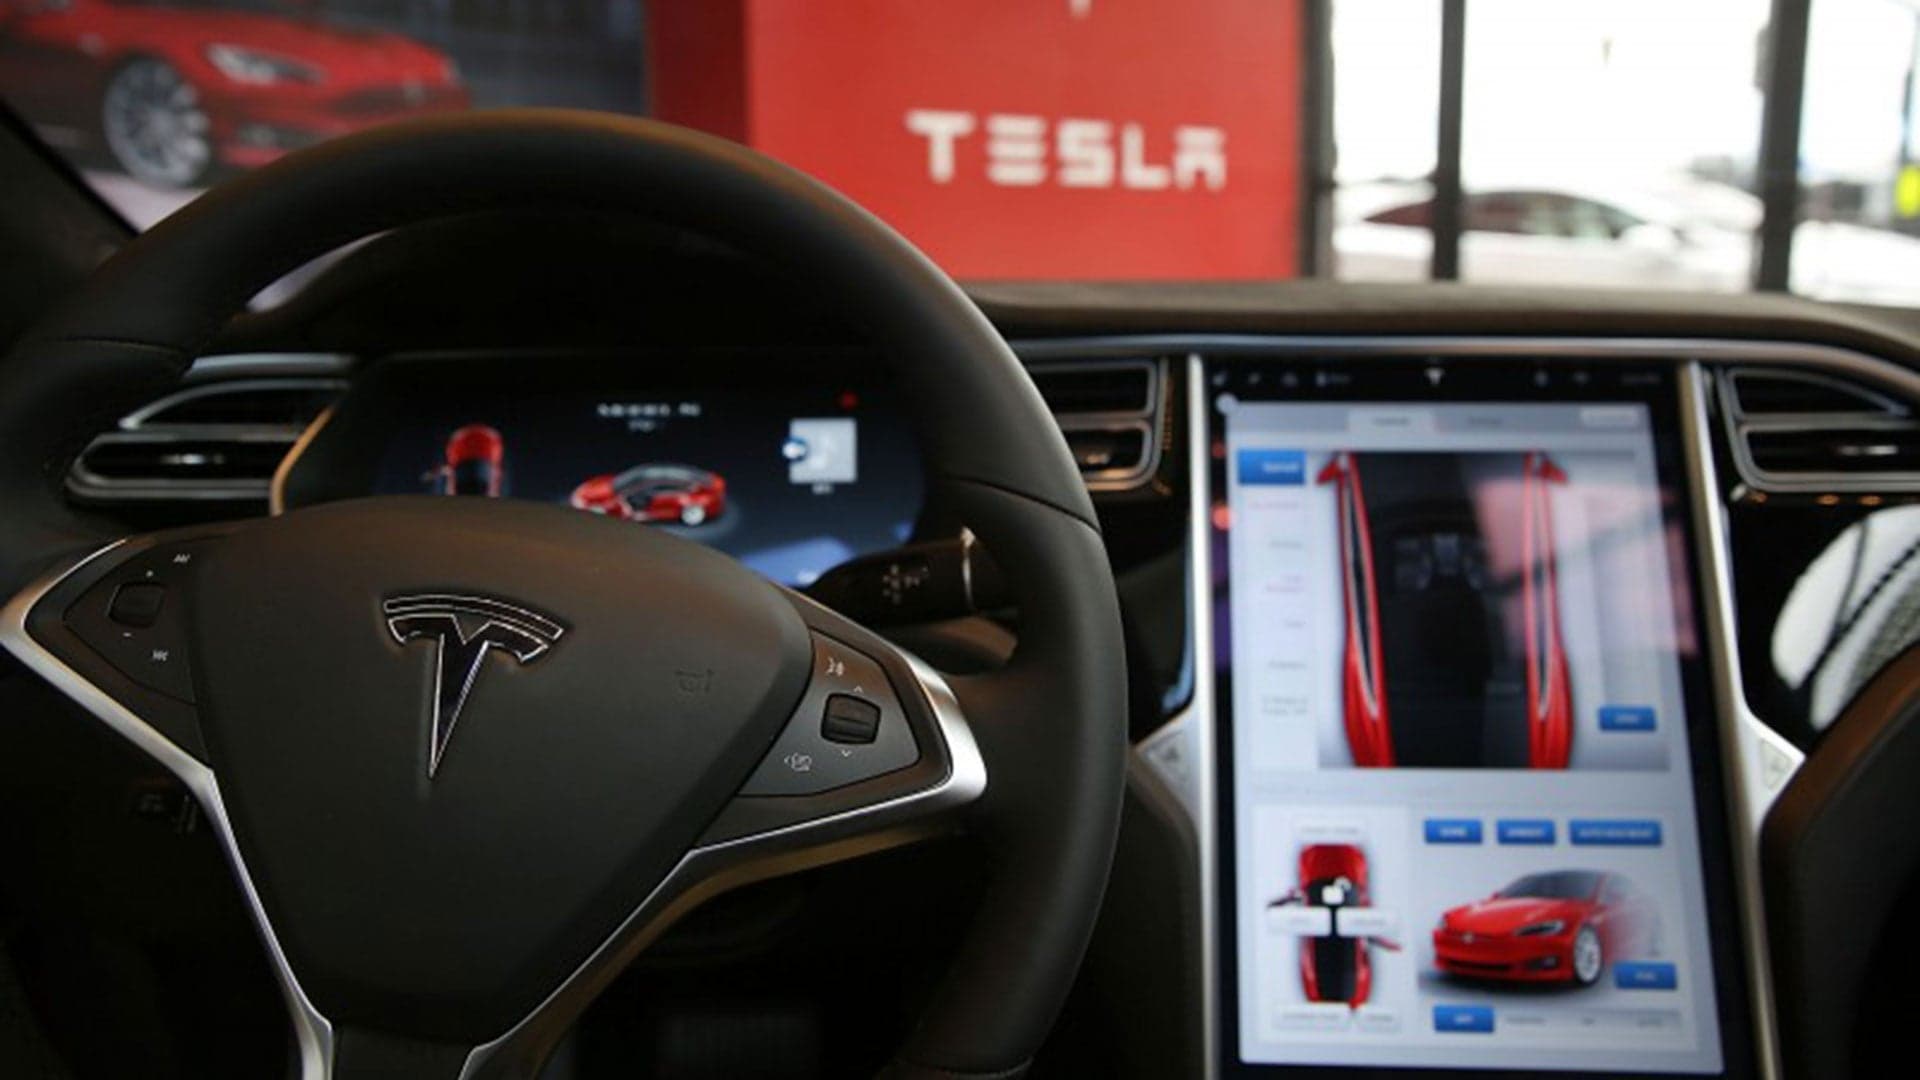 Delphi Plans Tesla-Like Over-the-Air Software Updates for Other Cars